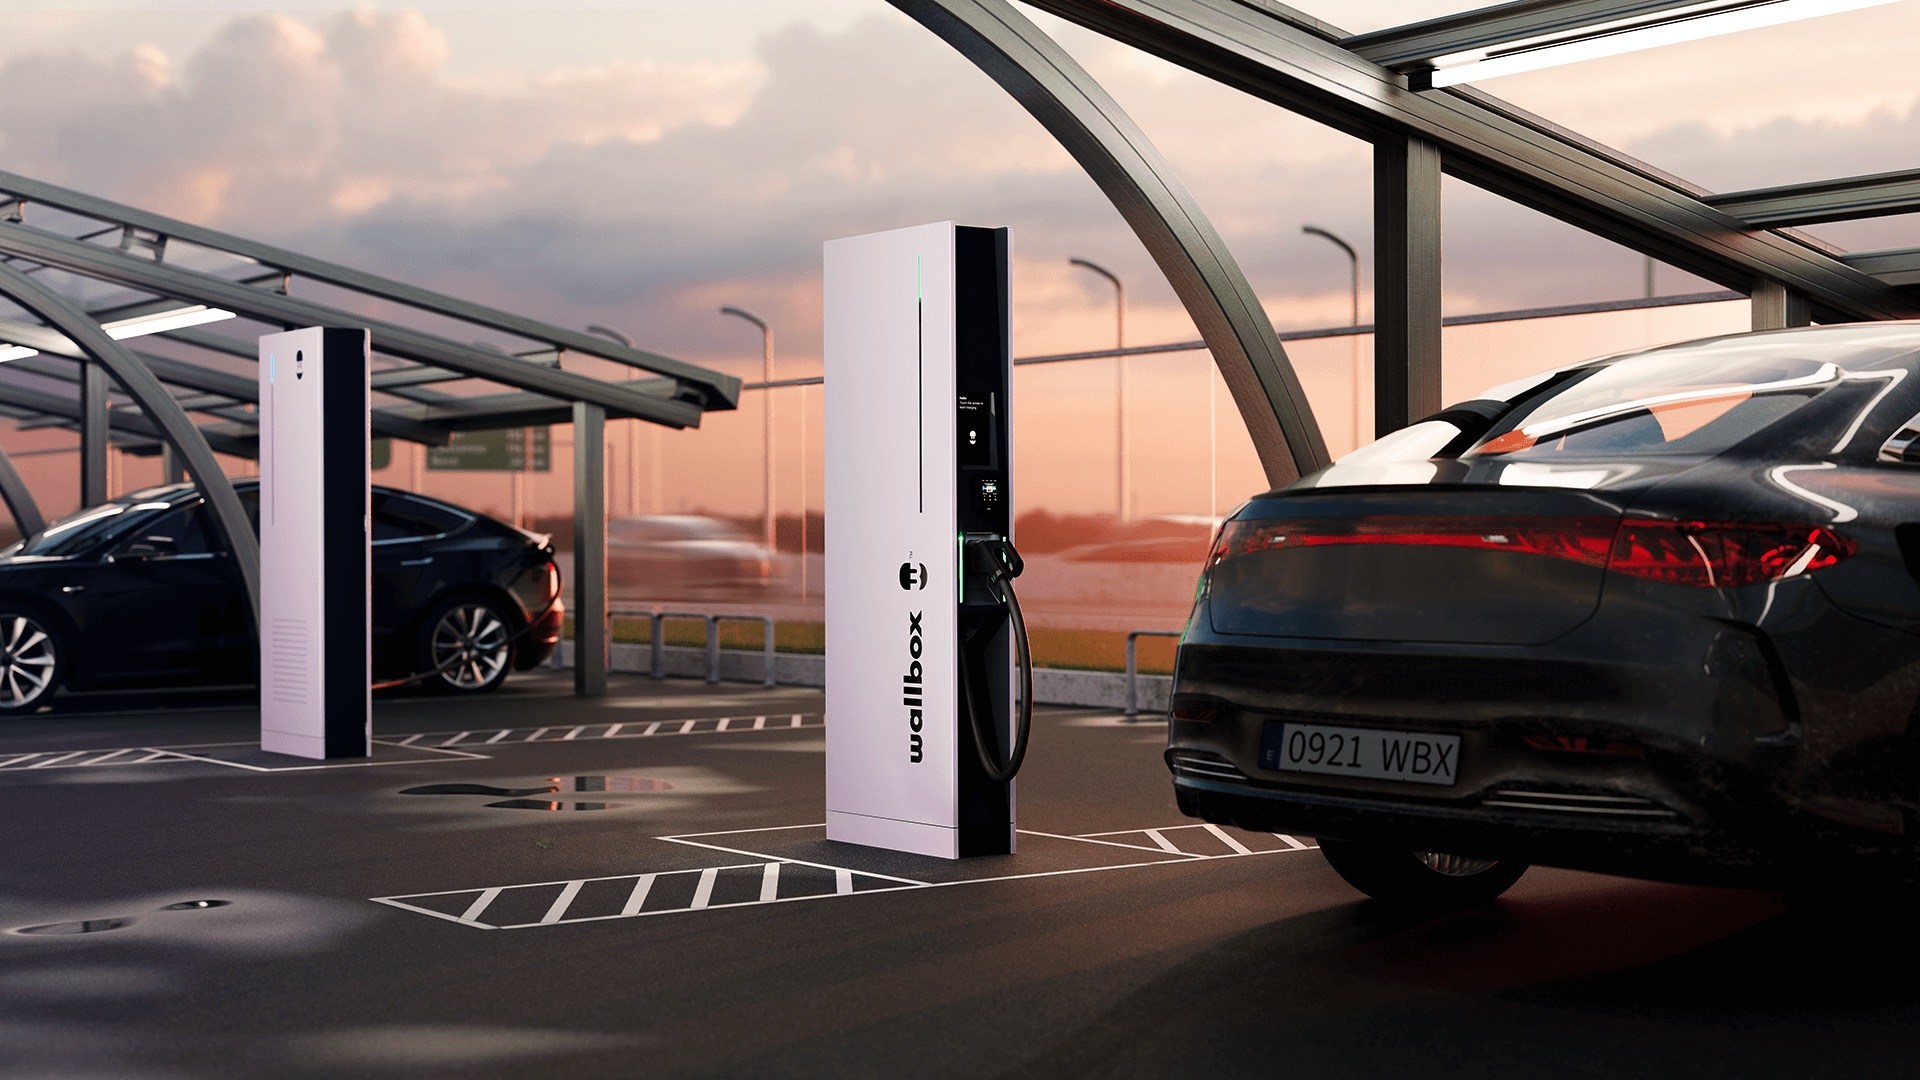 Wallbox Unveils Hypernova Ultrafast Public Charger at IAA MOBILITY 2021 Show